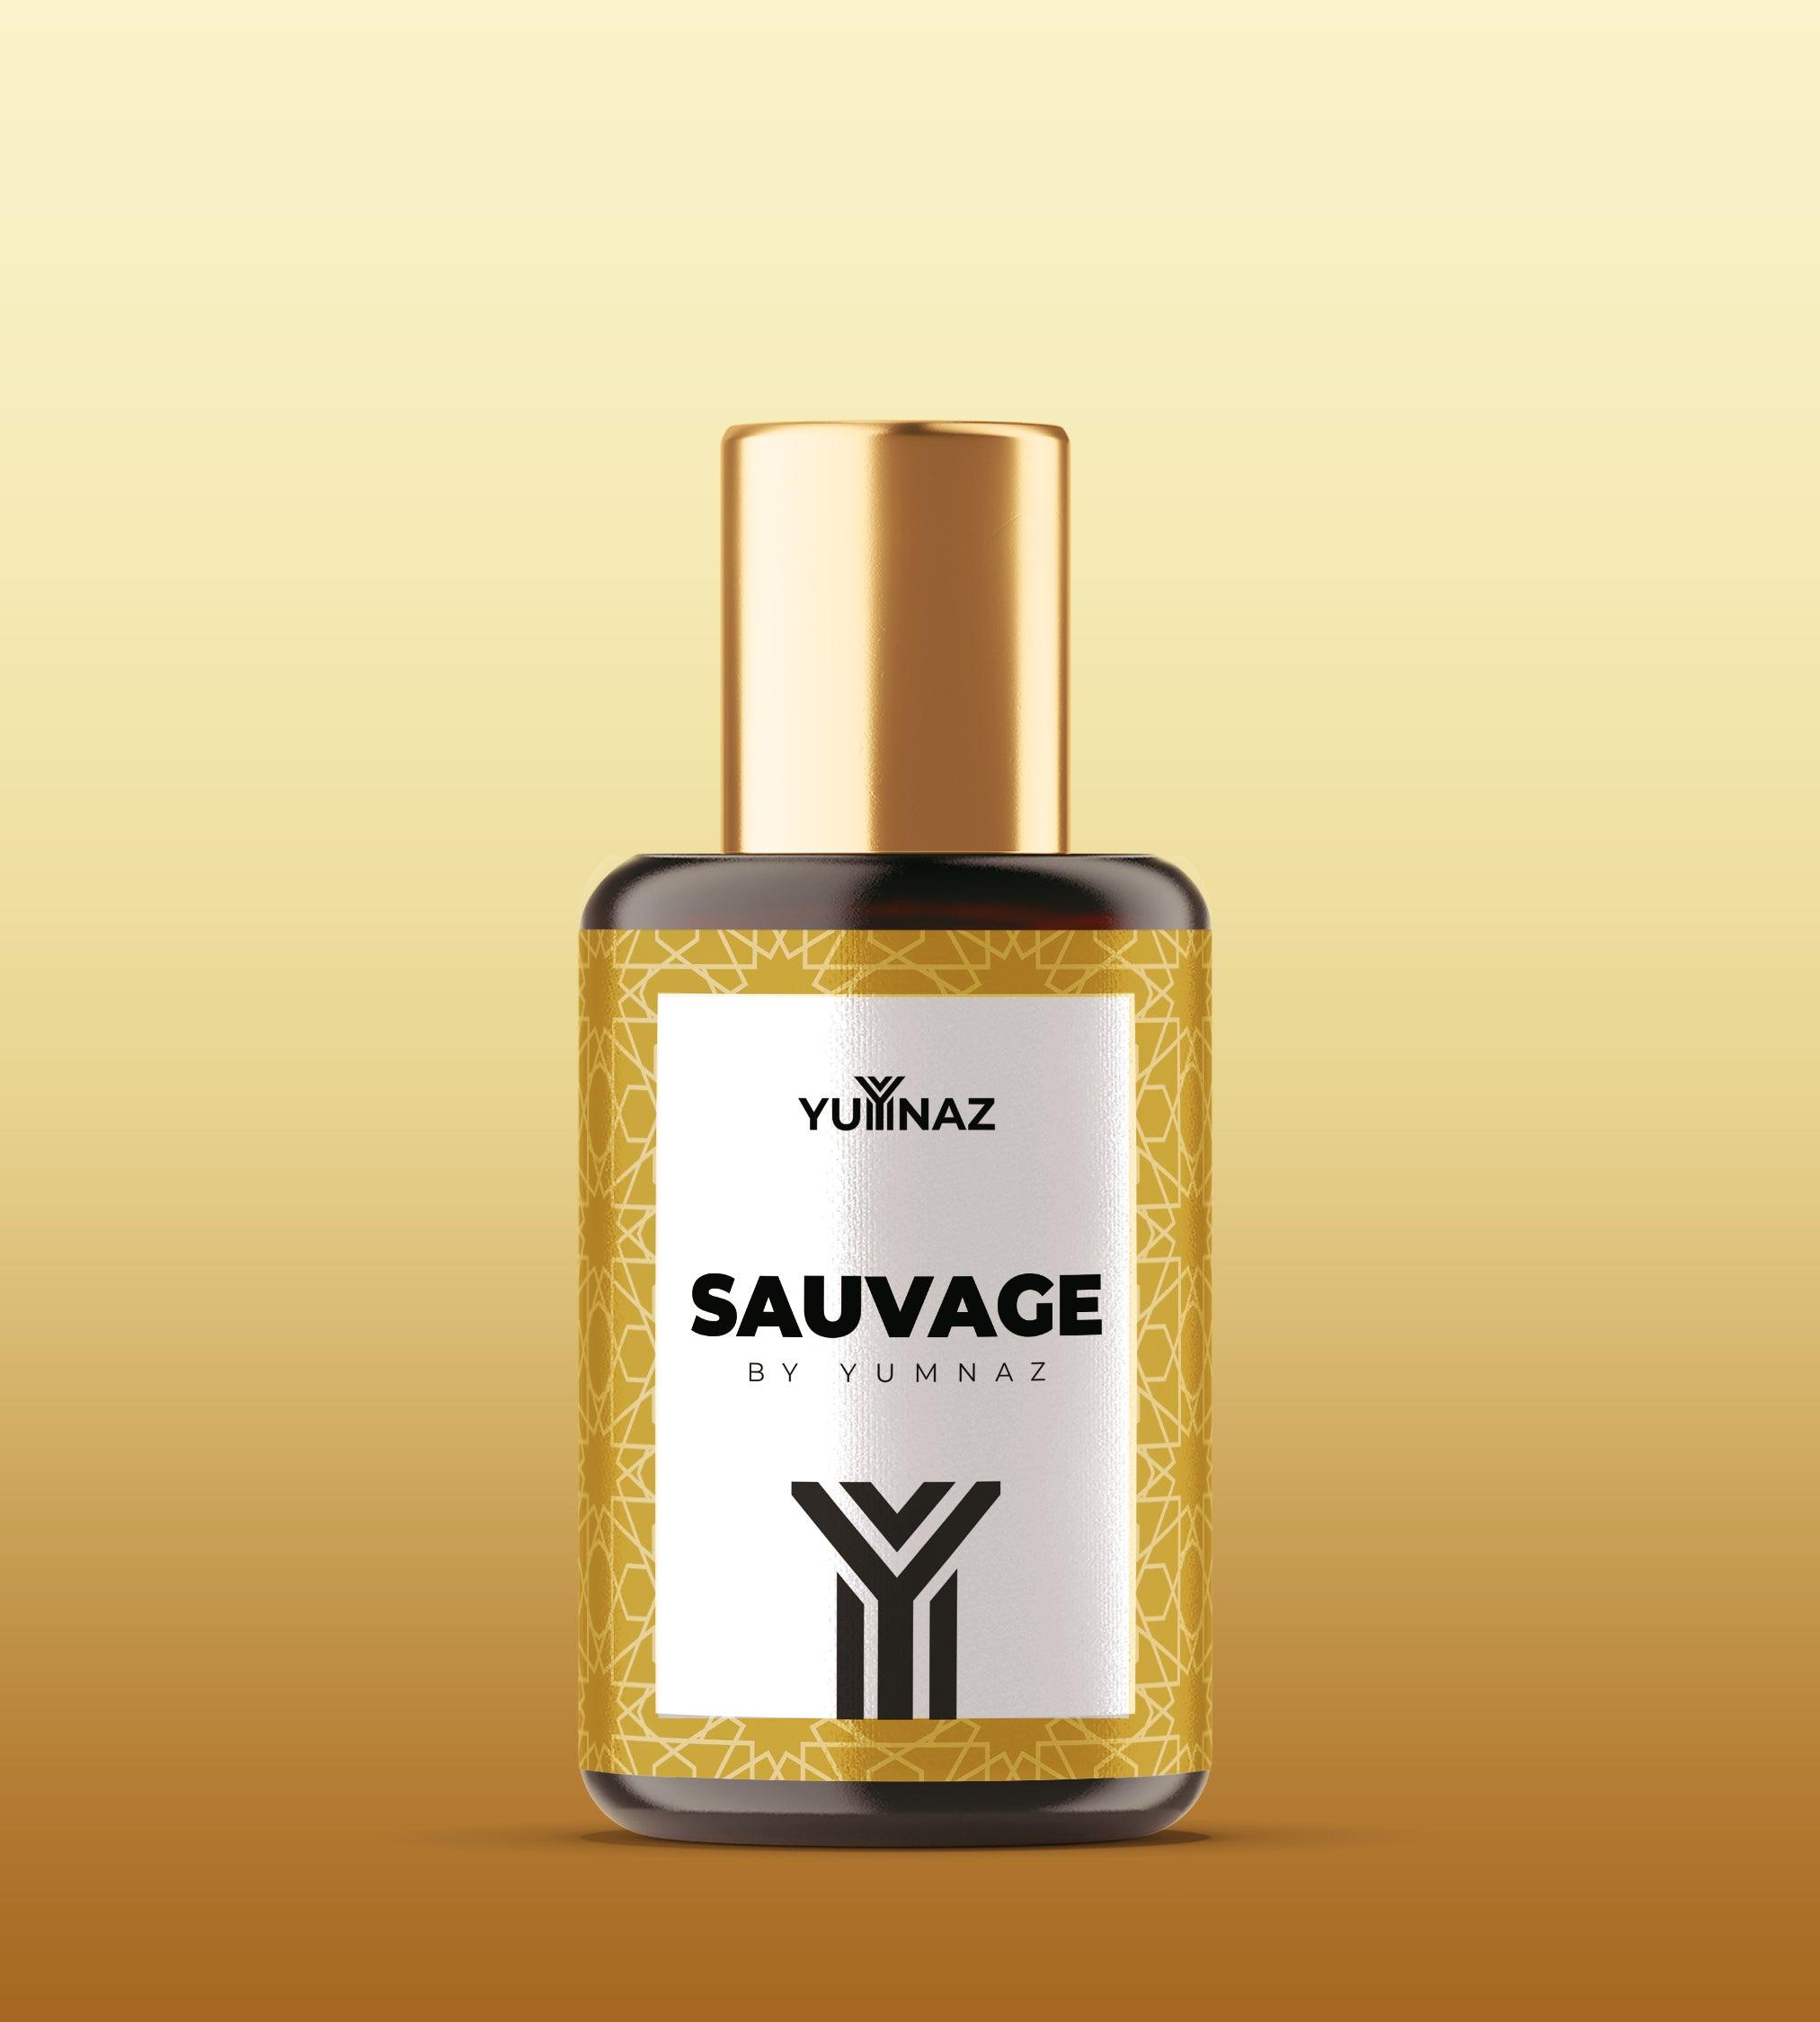 Dior Sauvage Perfume on a discounted price in Pakistan - yumnaz